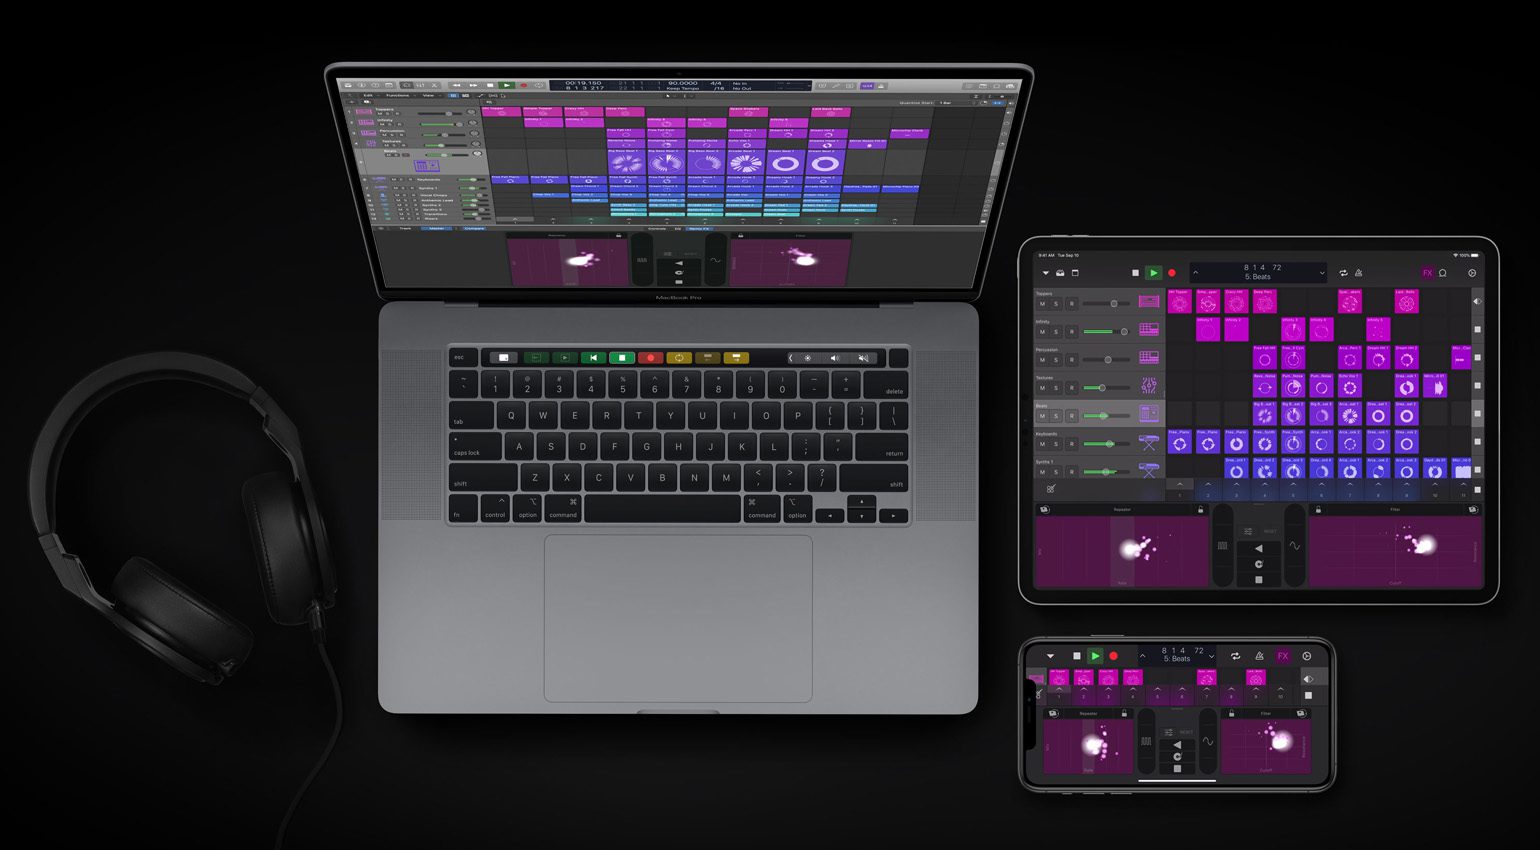 apple logic pro 7 system requirements